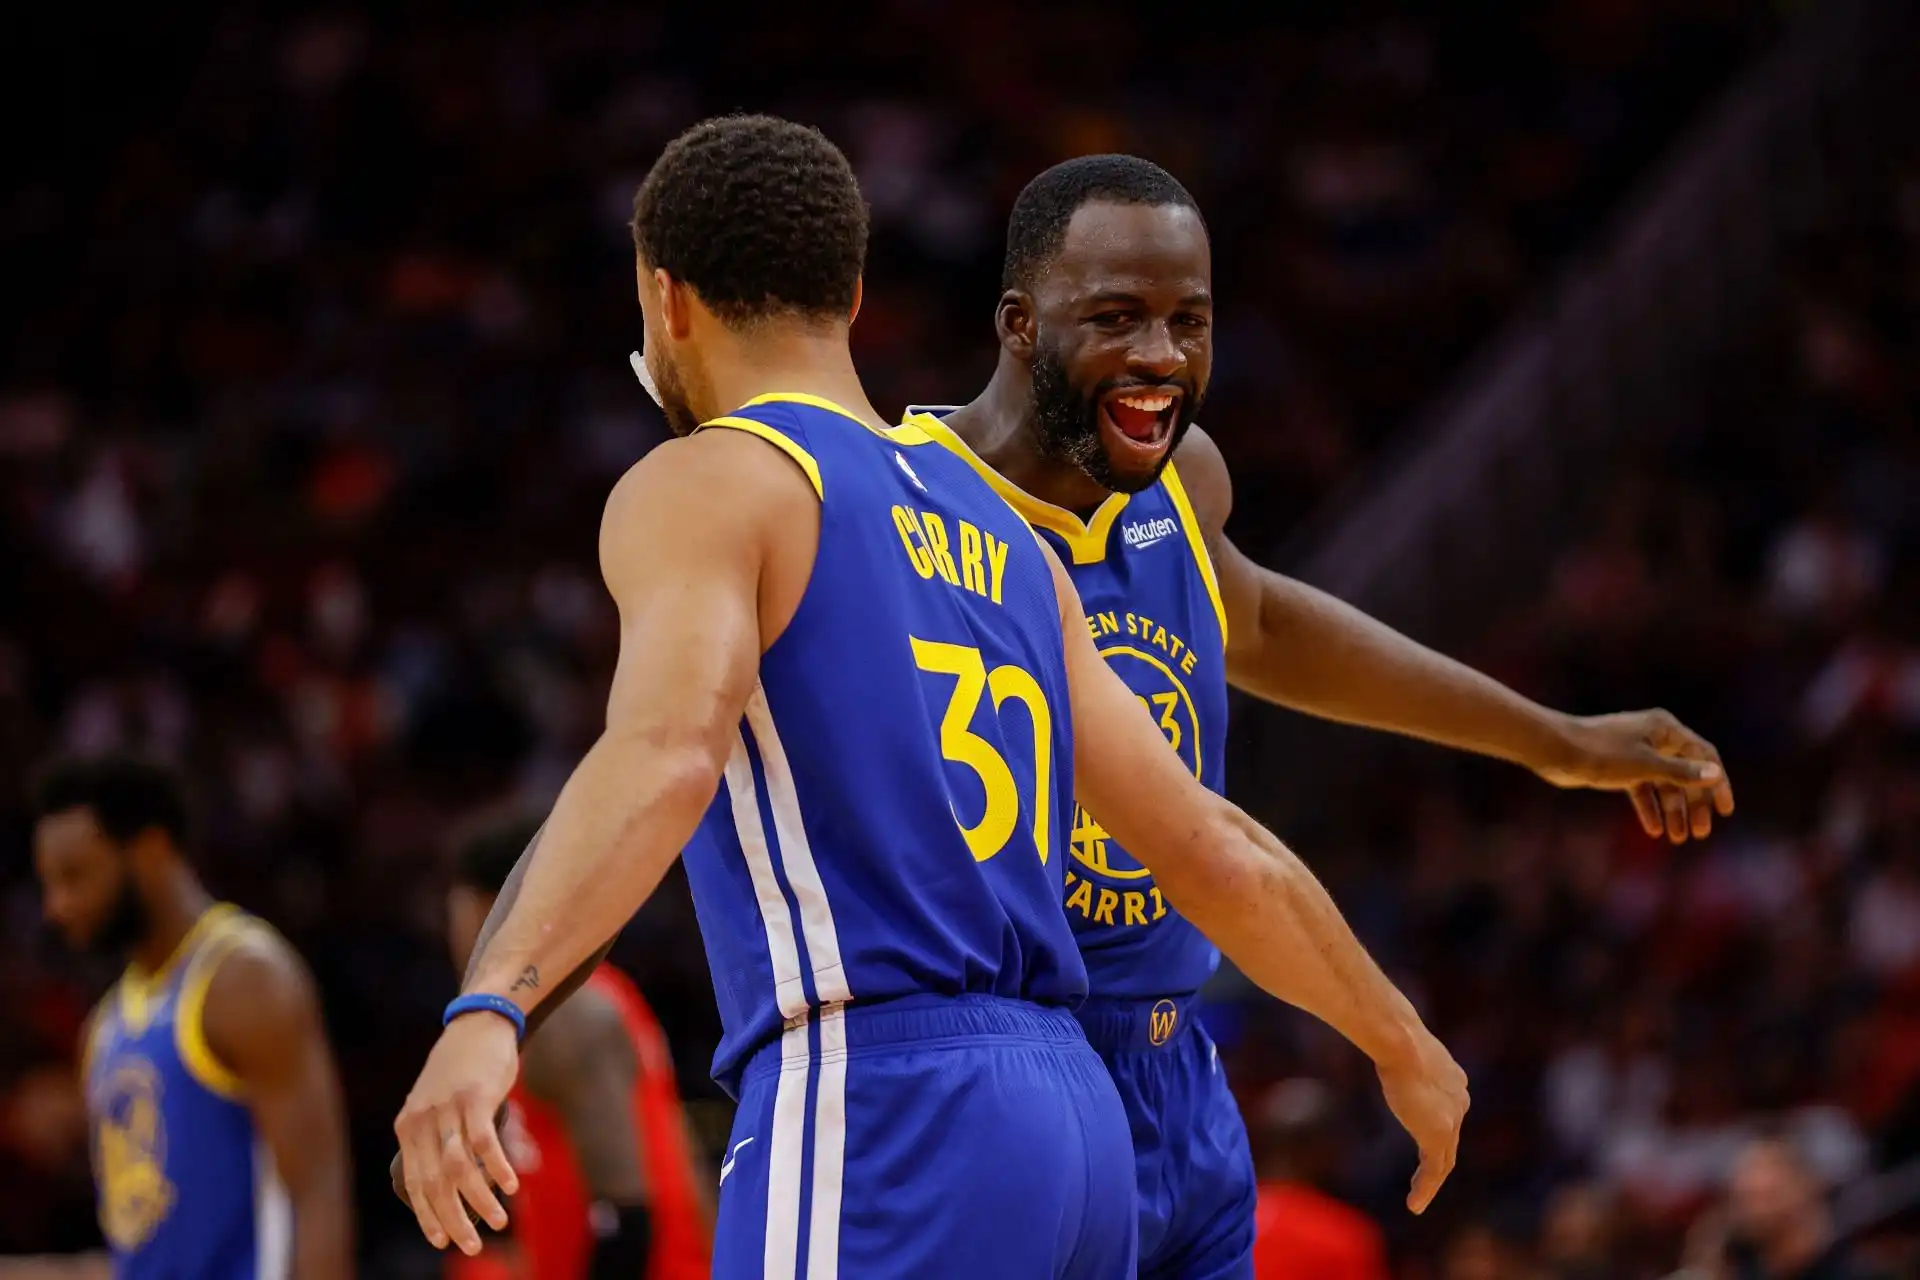 Stephen Curry warns Draymond Green not to get distracted from playing basketball: Be fiery, competitive